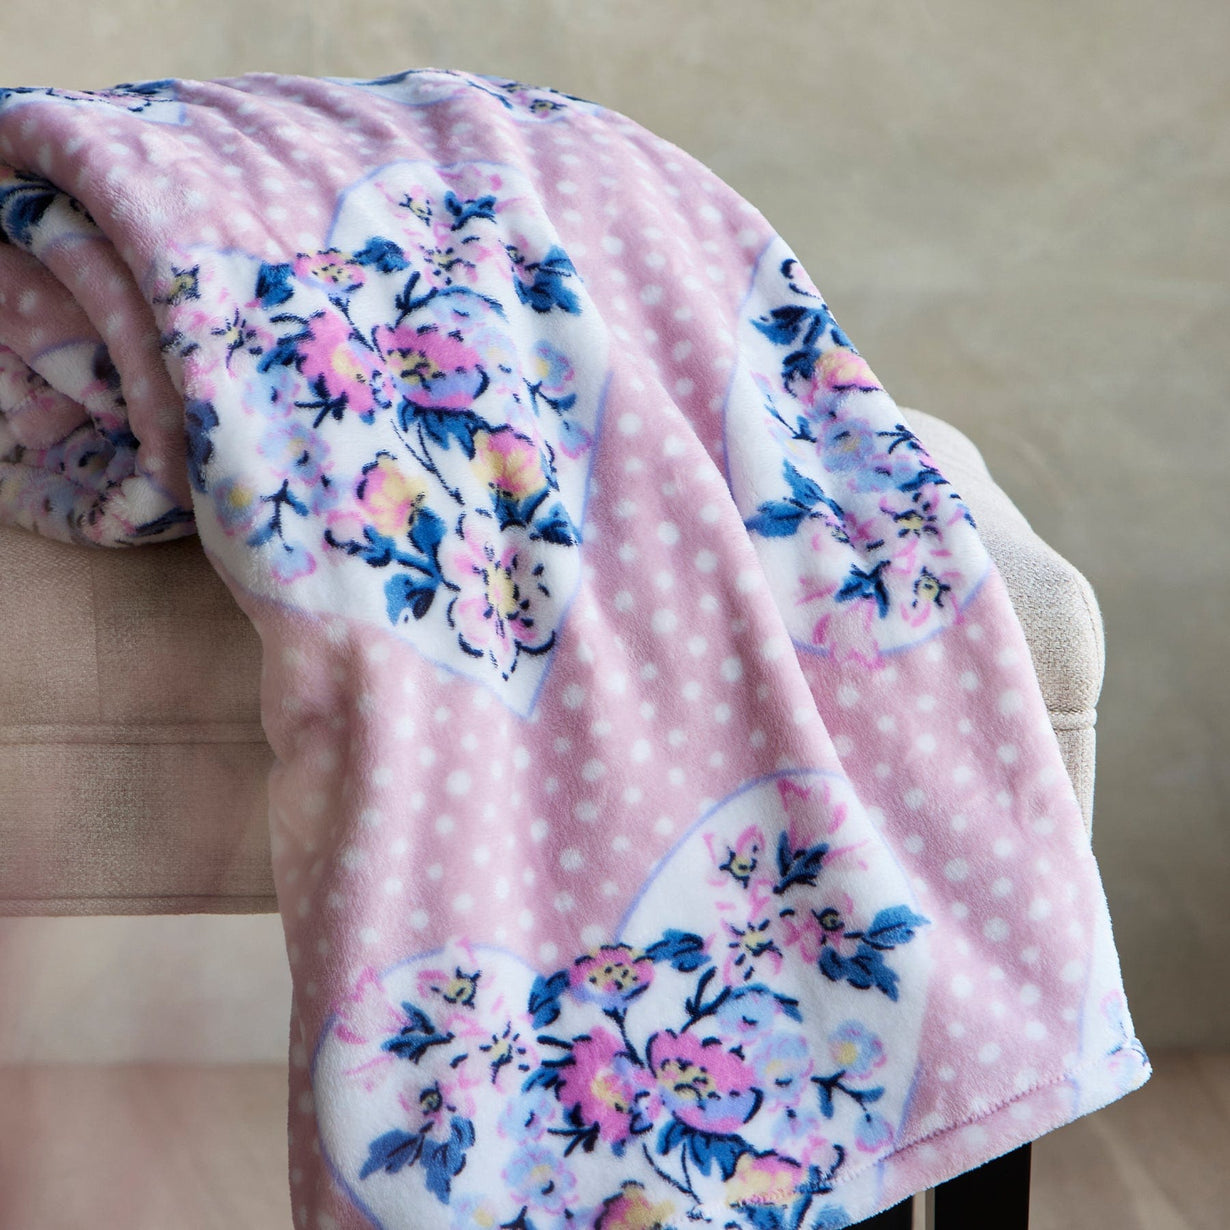 Pink throw blanket with floral pattern draped across chair